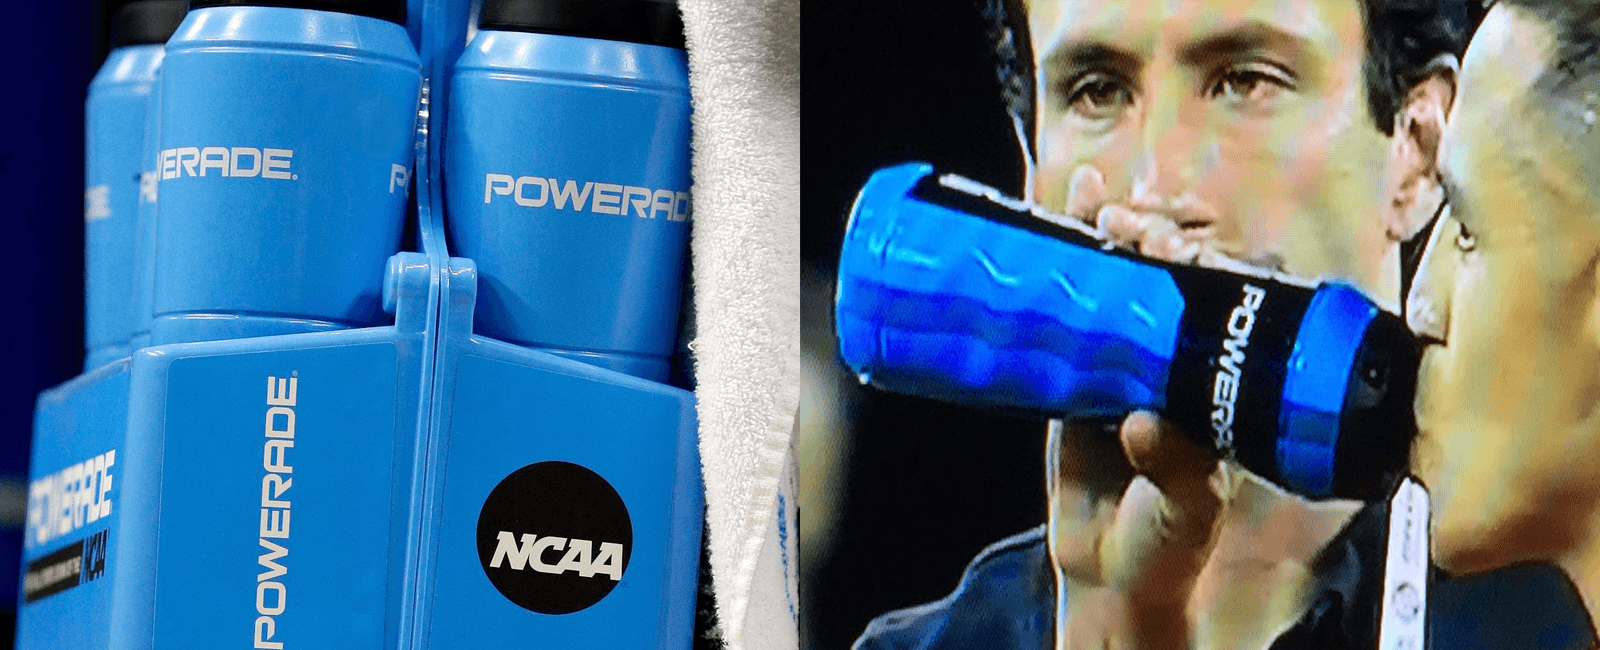 Powerade Products